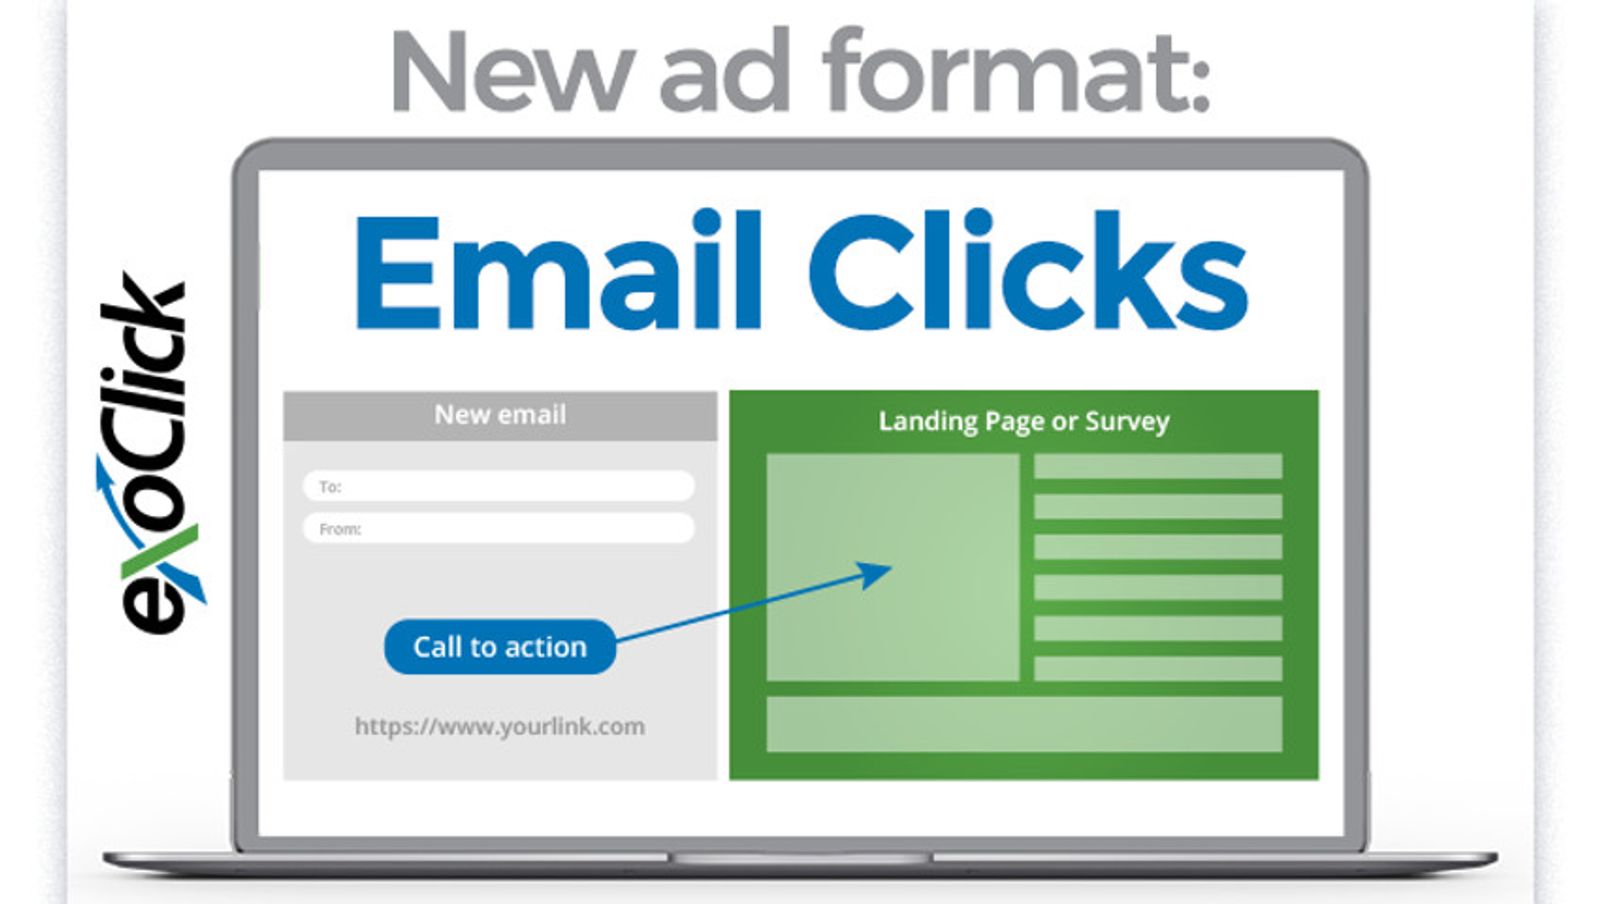 ExoClick Launches Email Clicks as Ad Format